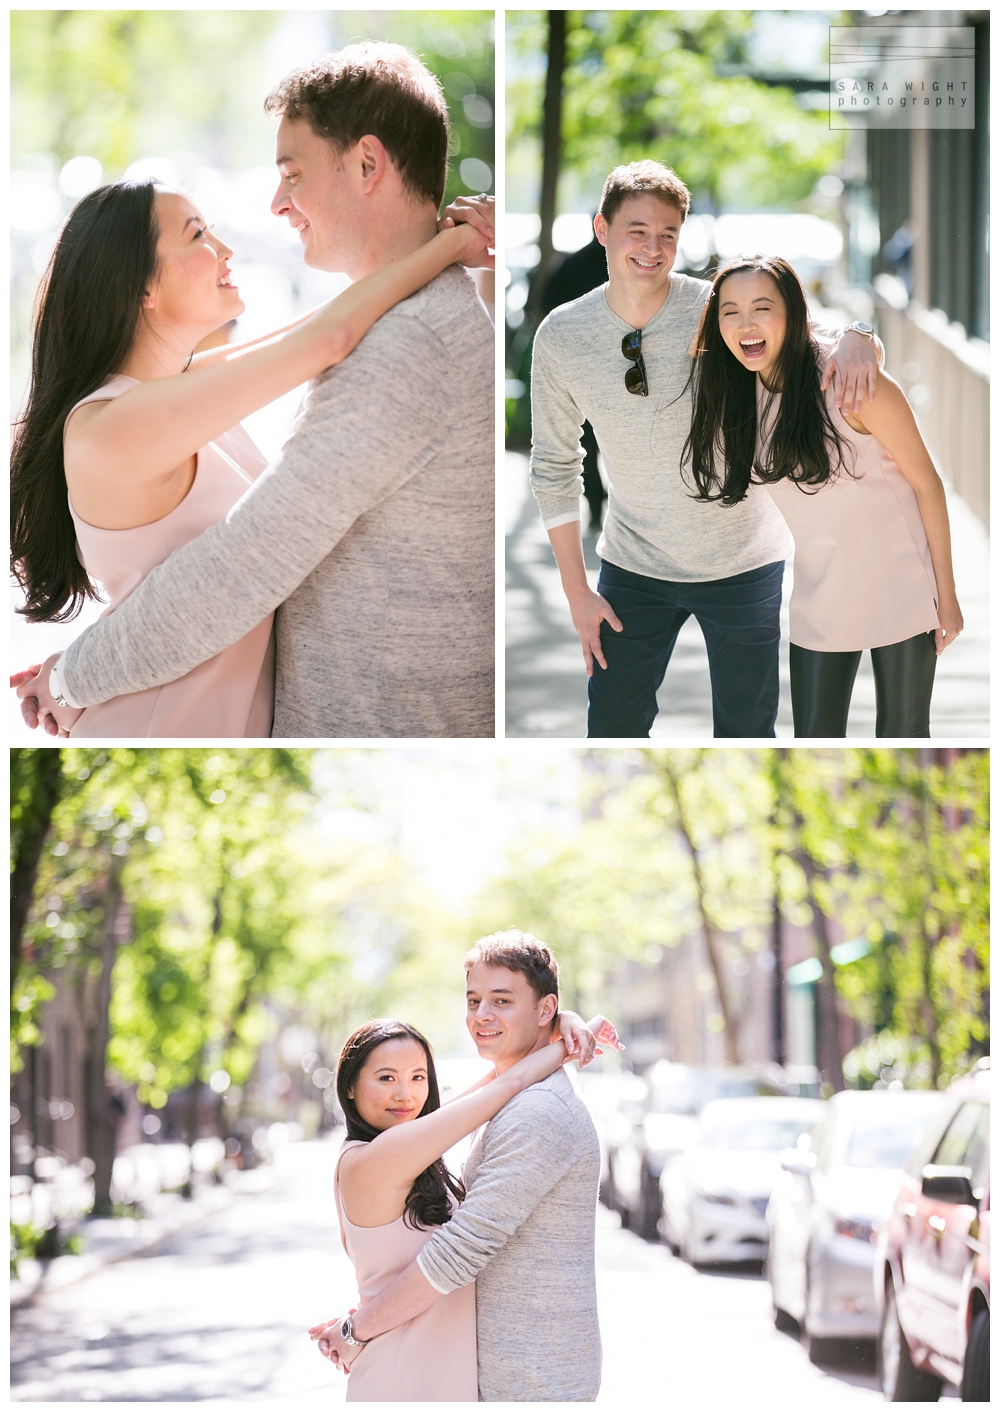 SaraWightPhotography_HighLineEngagementSession_0002a